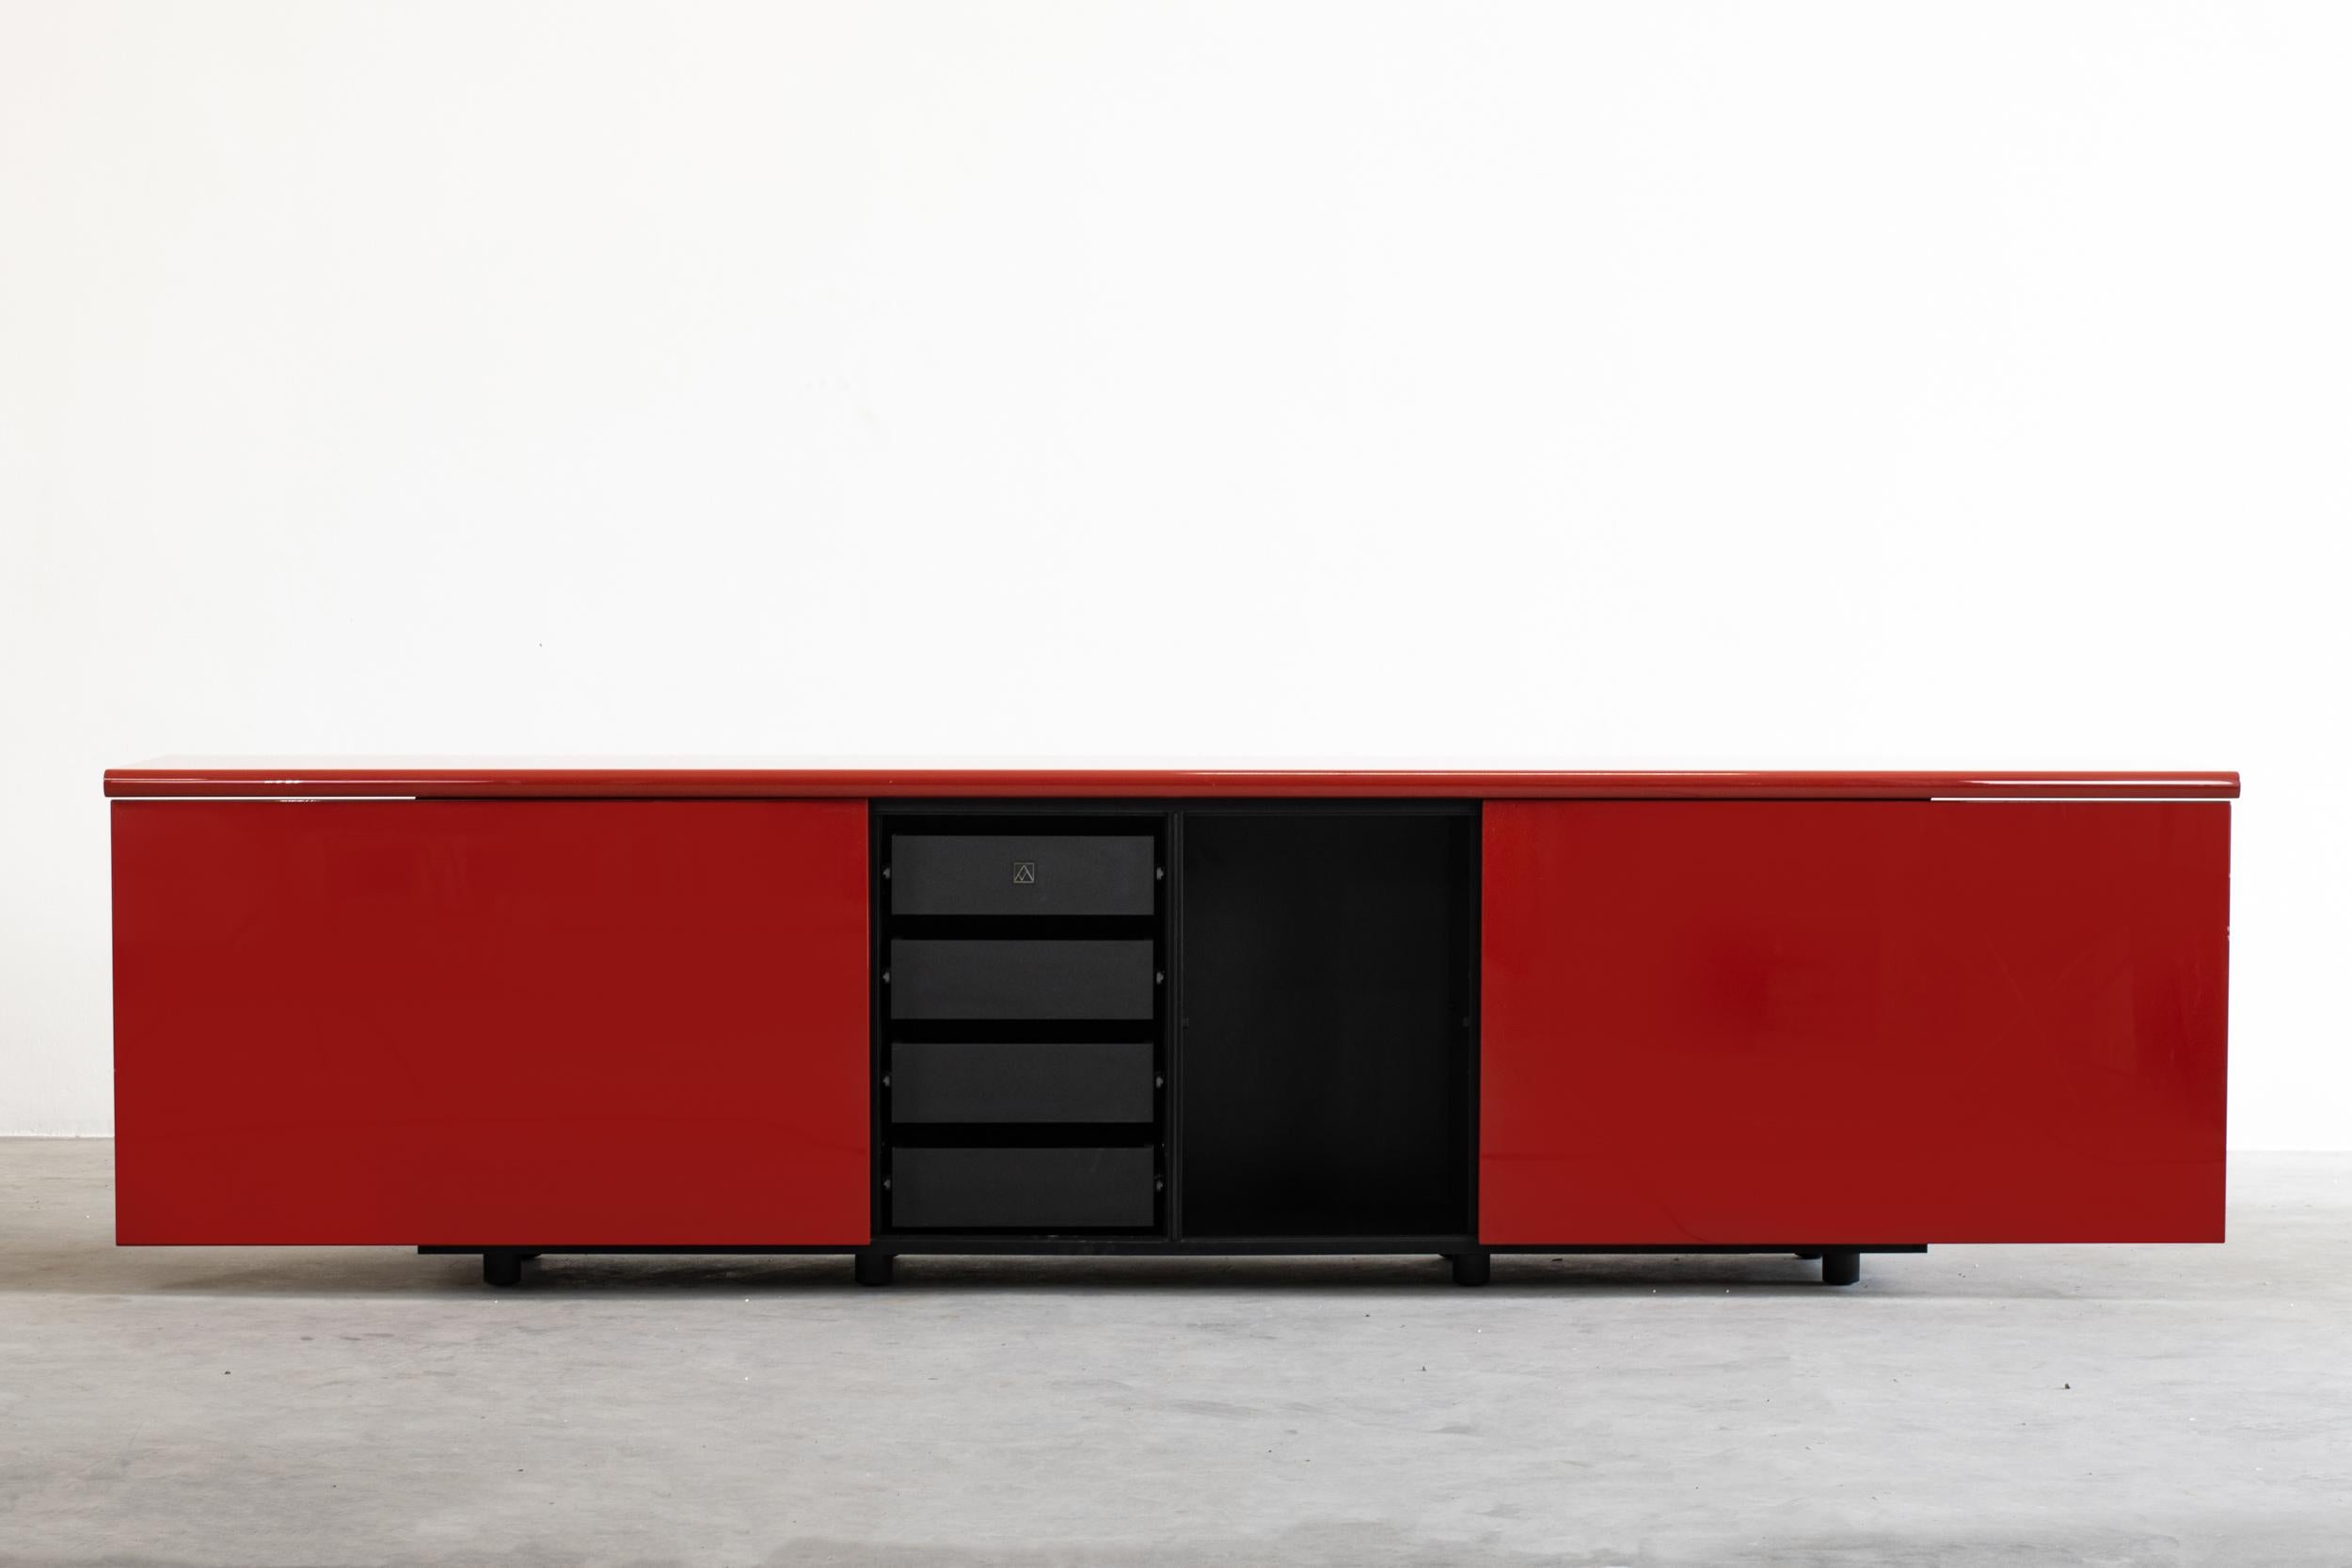 Giotto Stoppino Sheraton sideboard with a storage compartment consists of two sliding doors that slide outward to expose sections for shelves and four drawers on the left-hand side.
External structure in red lacquered wood, laminated interior, and